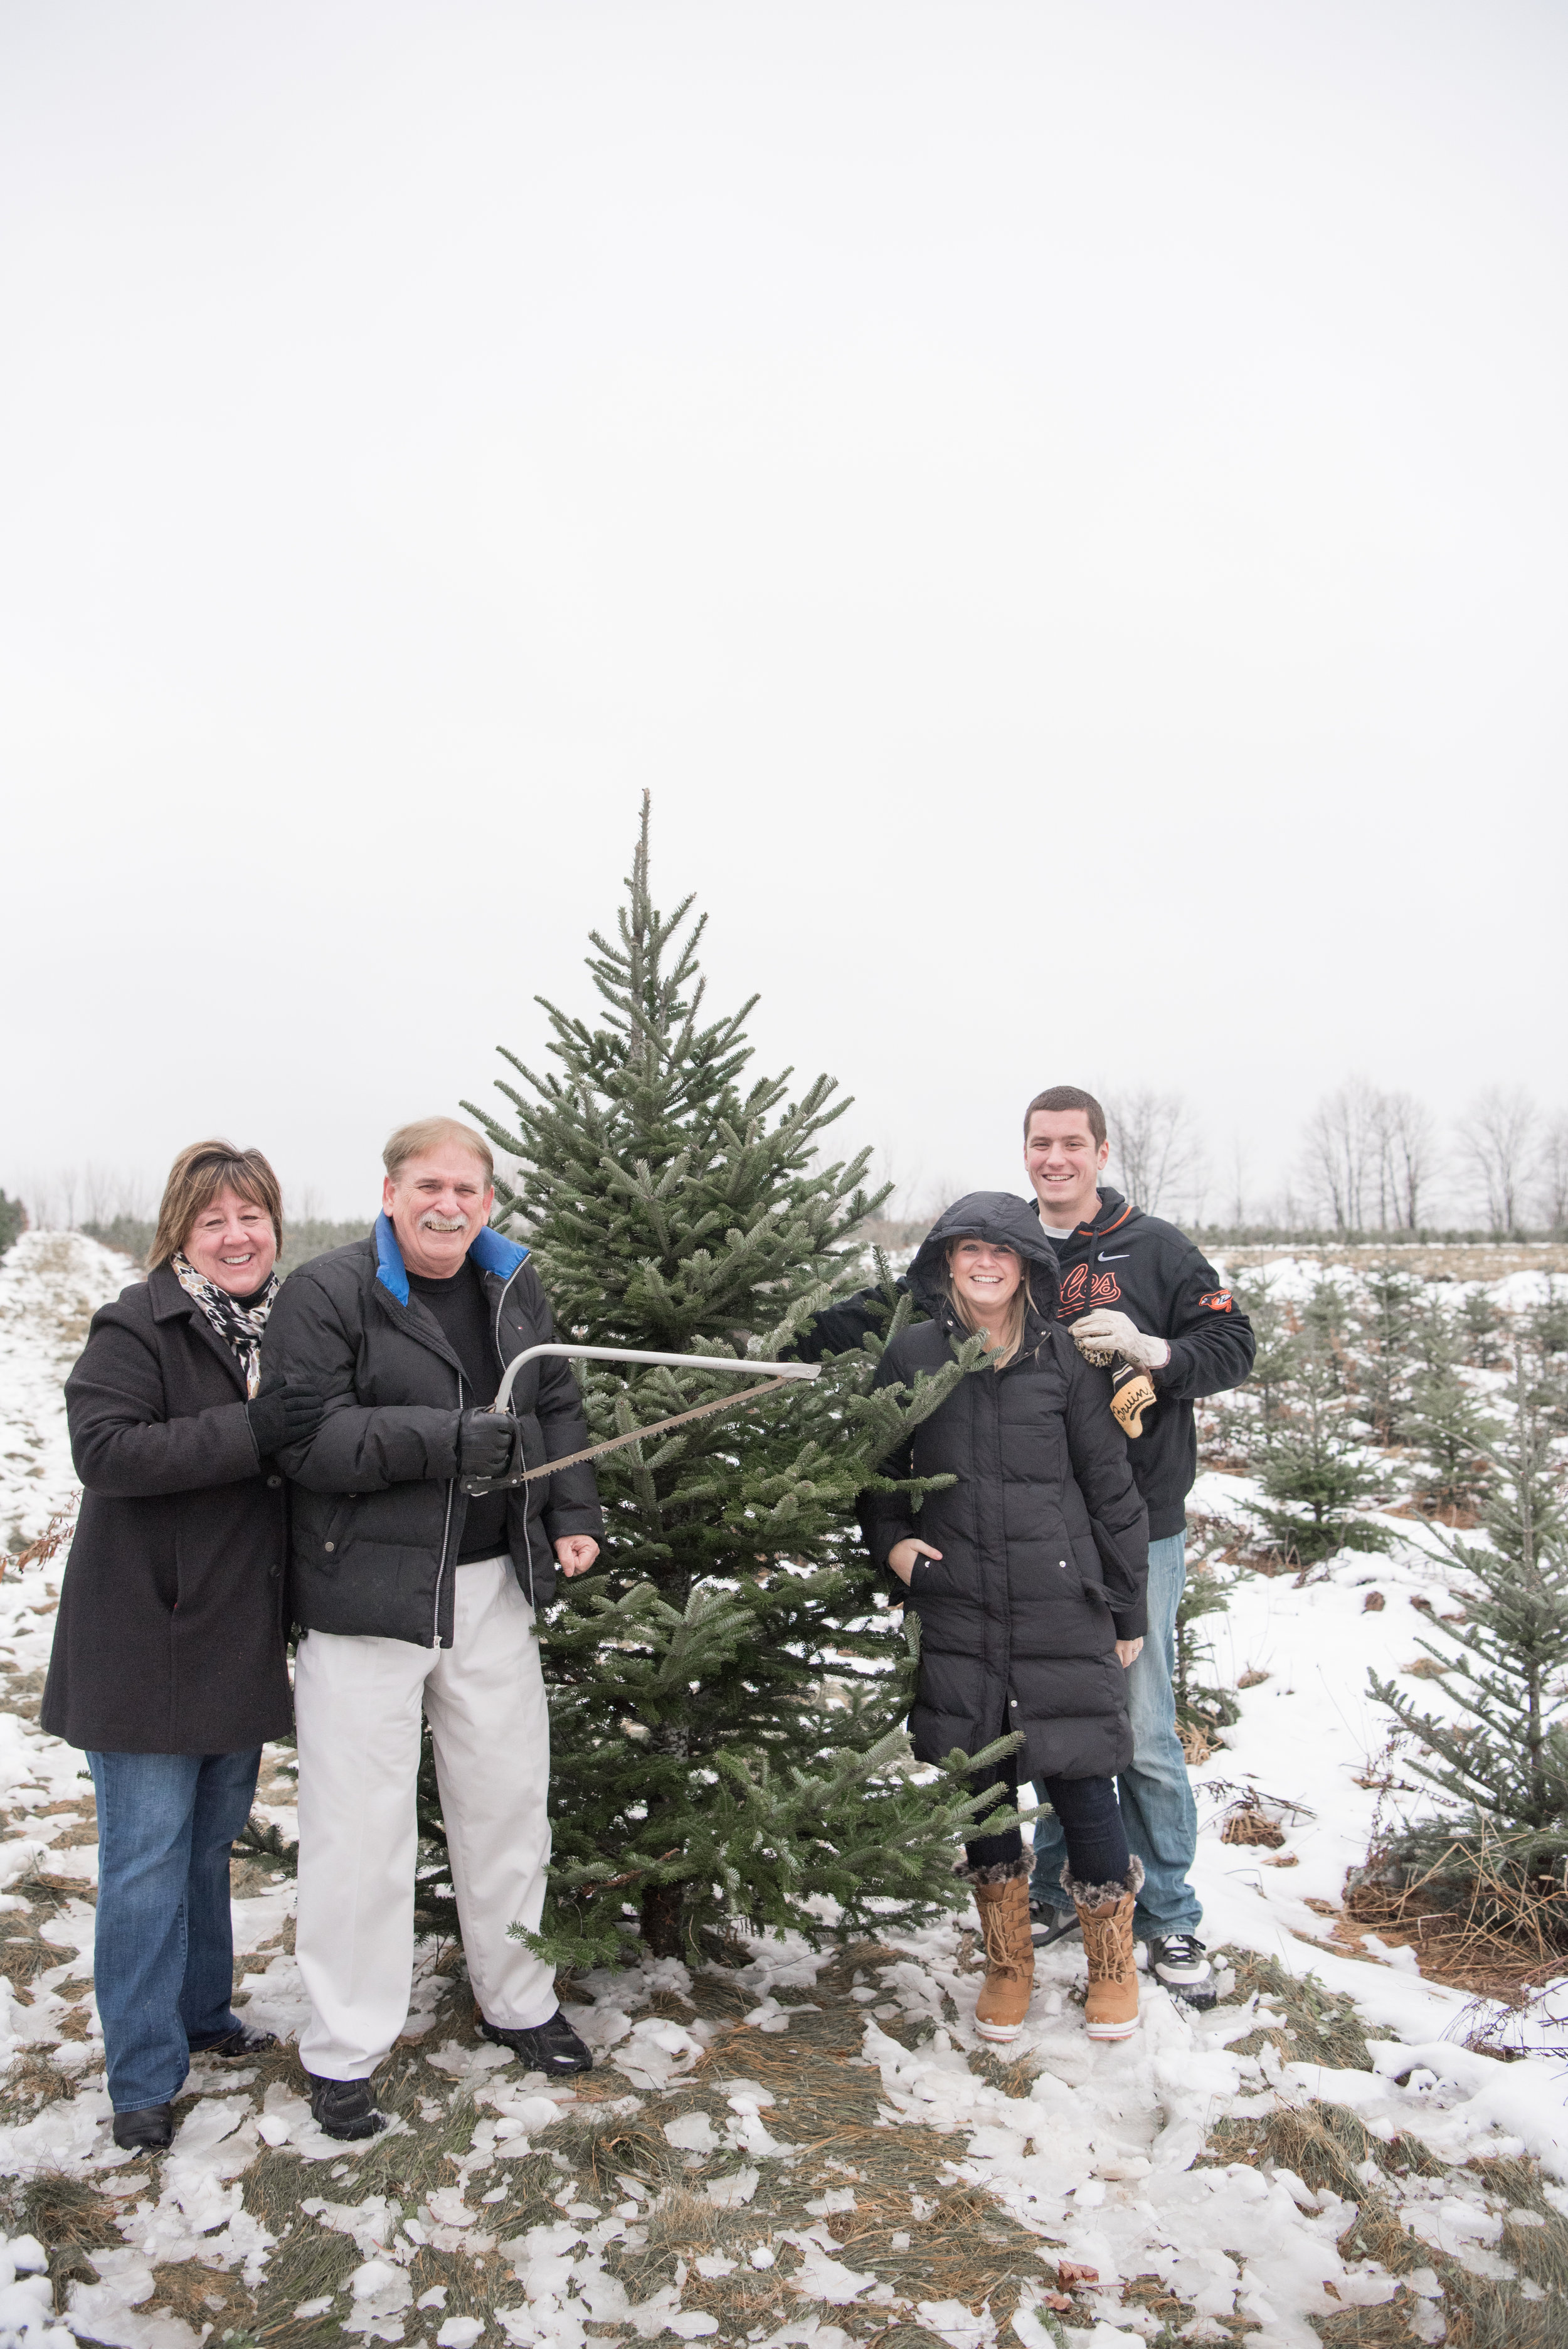  Cutting down the family christmas tree... don't let Dave fool you - Jordan did all the work! 